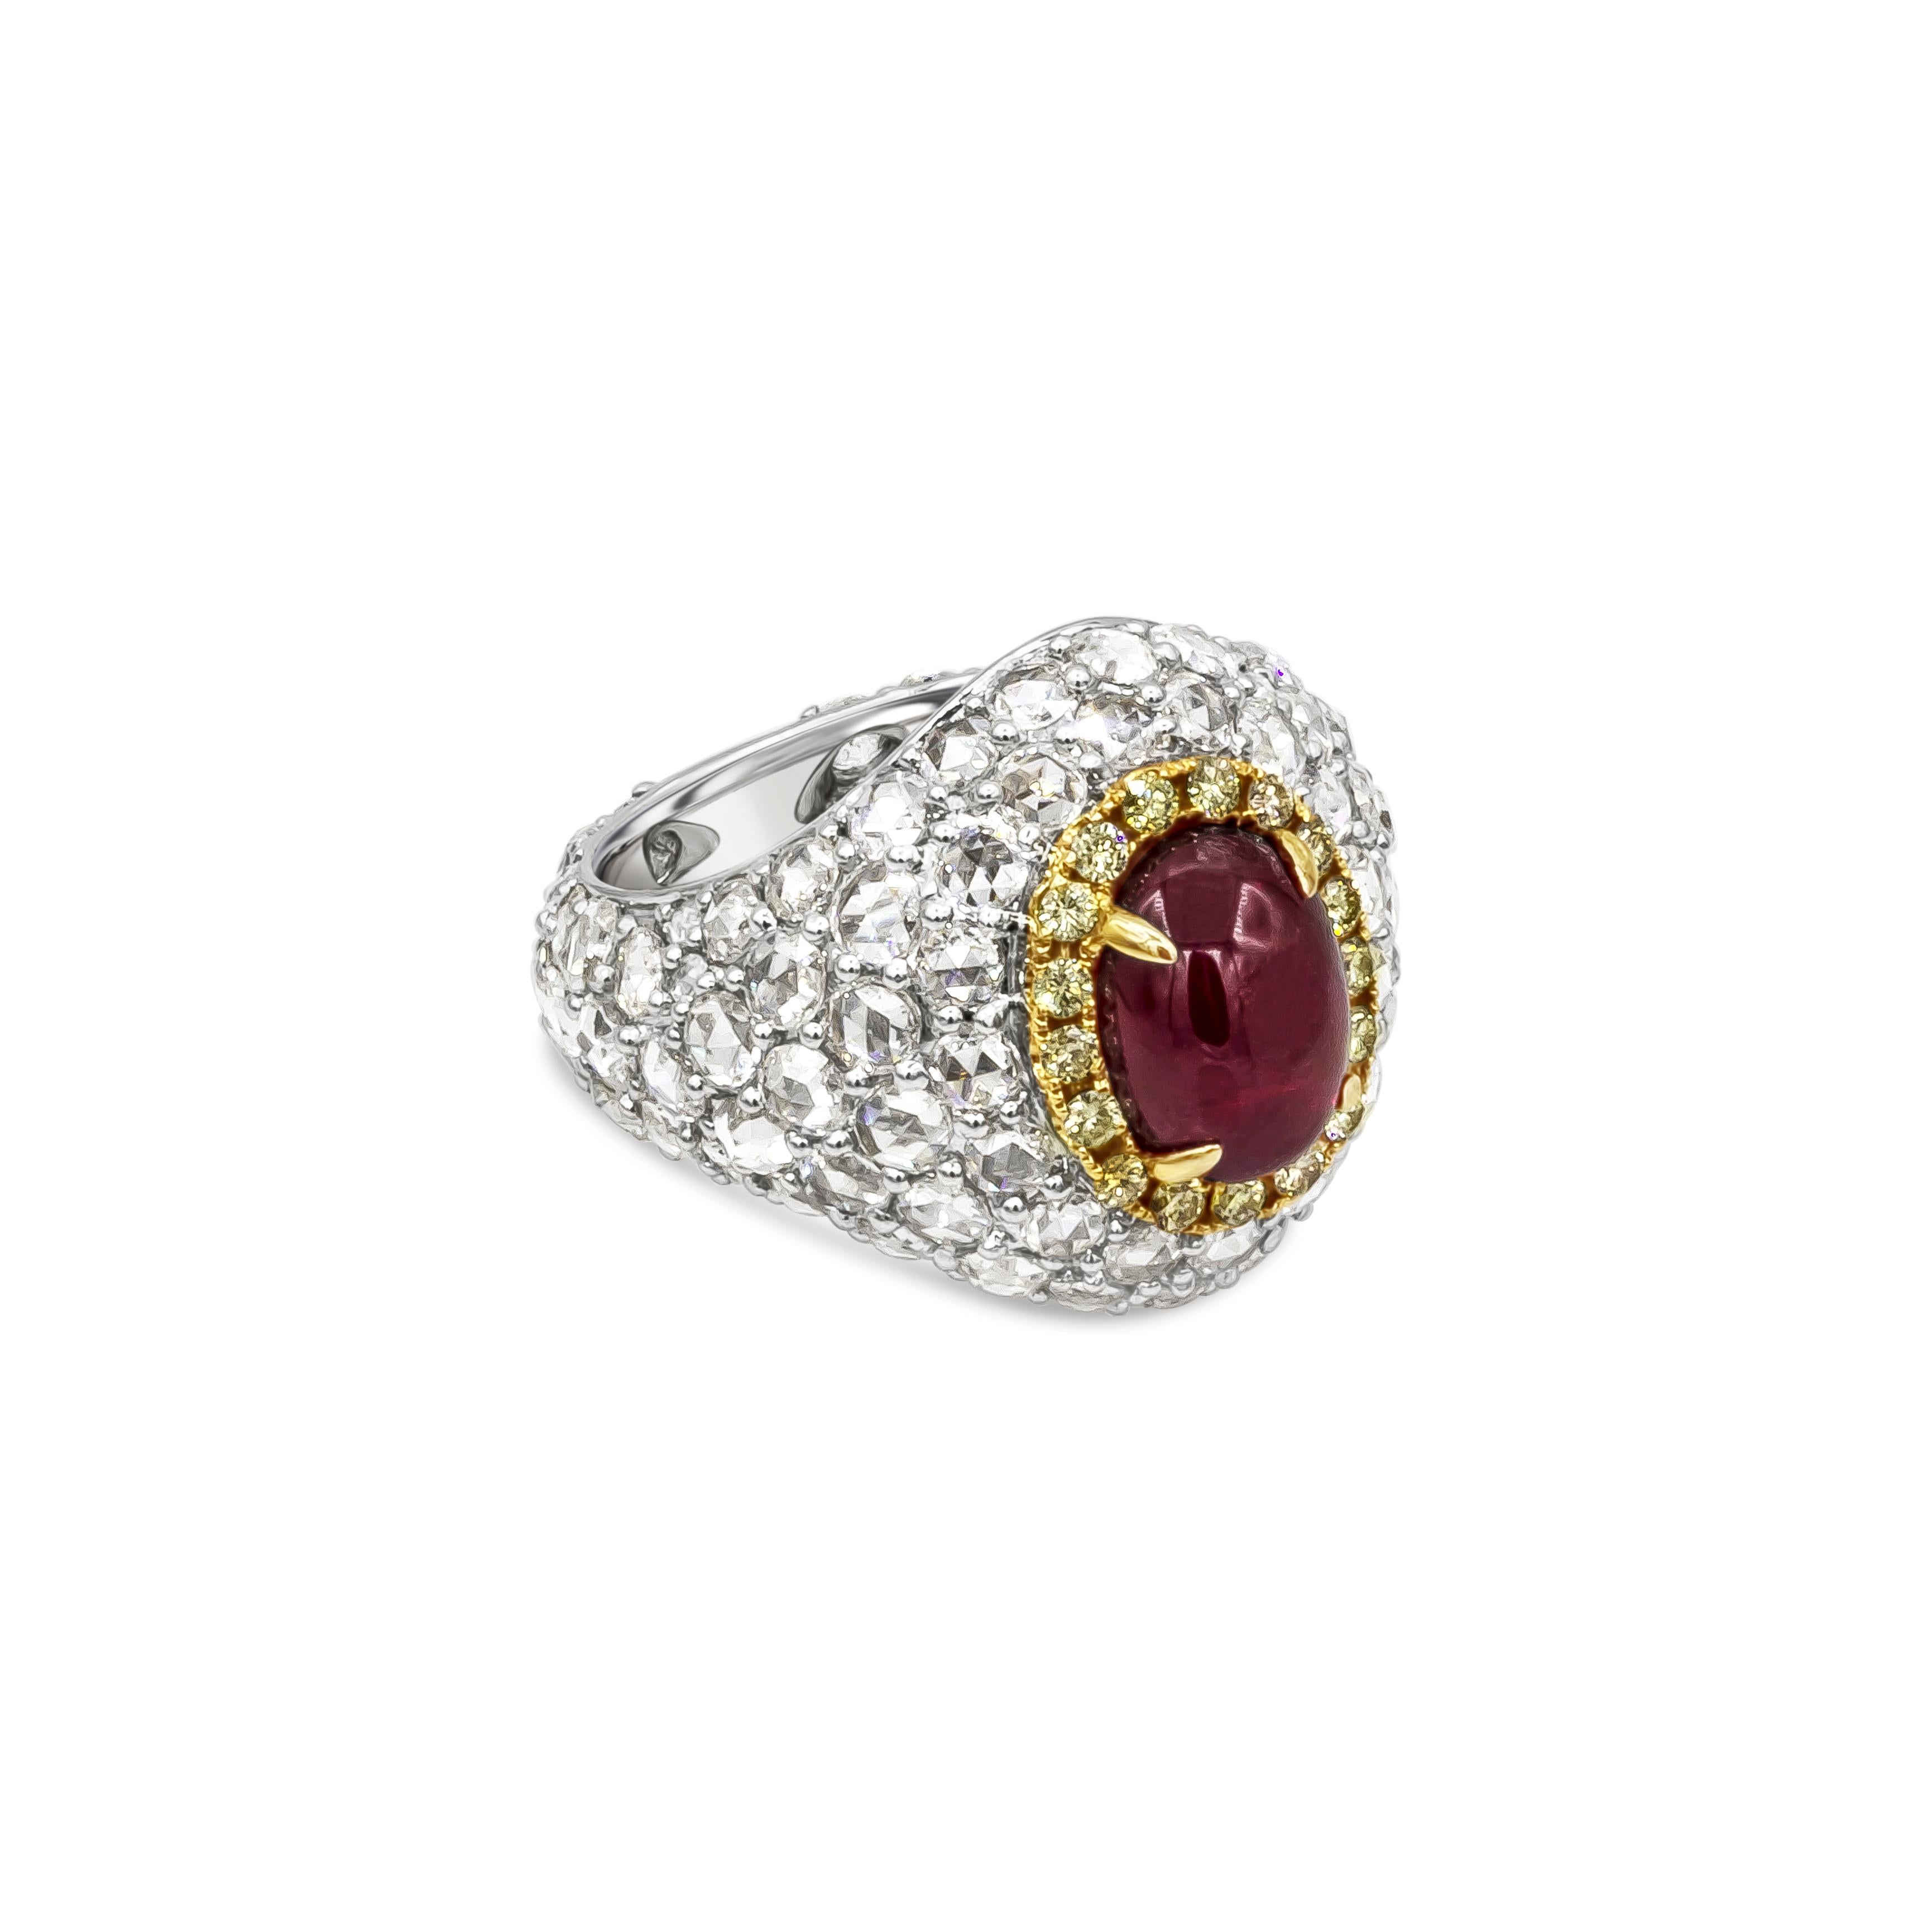 A fashionable and stunning dome cocktail ring showcasing a 3.76 carats color-rich cabochon ruby, surrounded by a single row of round brilliant yellow diamonds. Set in a polished 18k white gold ring micro-pave set with beautiful rose cut diamonds